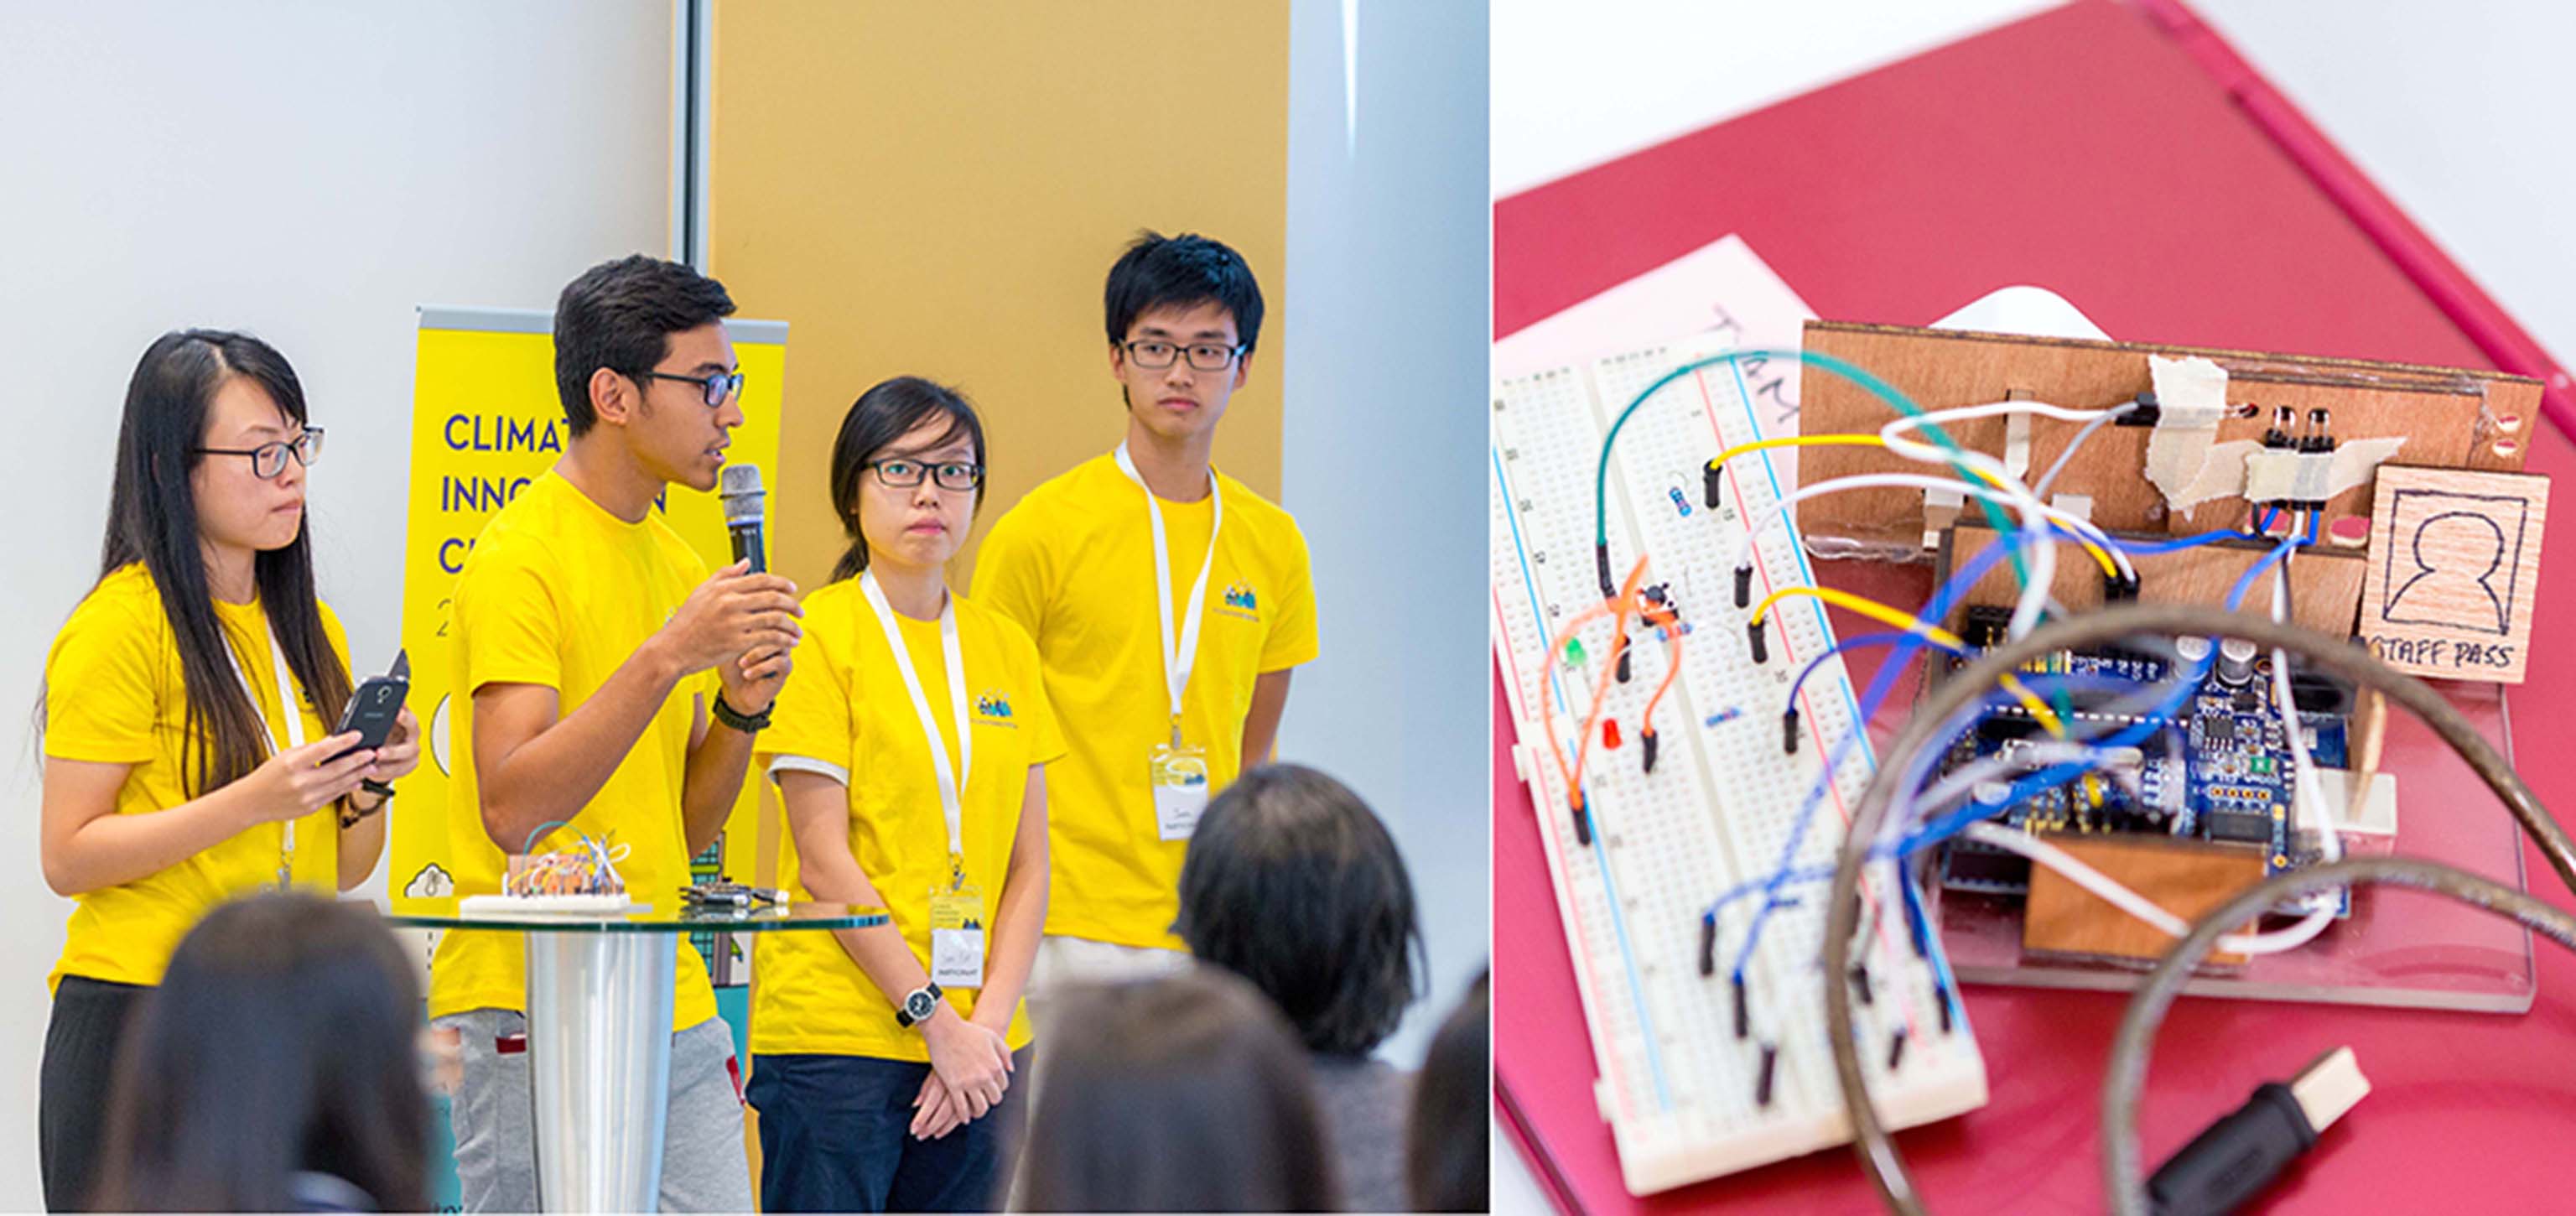 The top-winning team explains how its power monitoring system allows users to track their energy usage using radio-frequency identification (RFID) technology. It hopes that personalised statistics about energy use will motivate users to adopt energy-saving habits in the office.